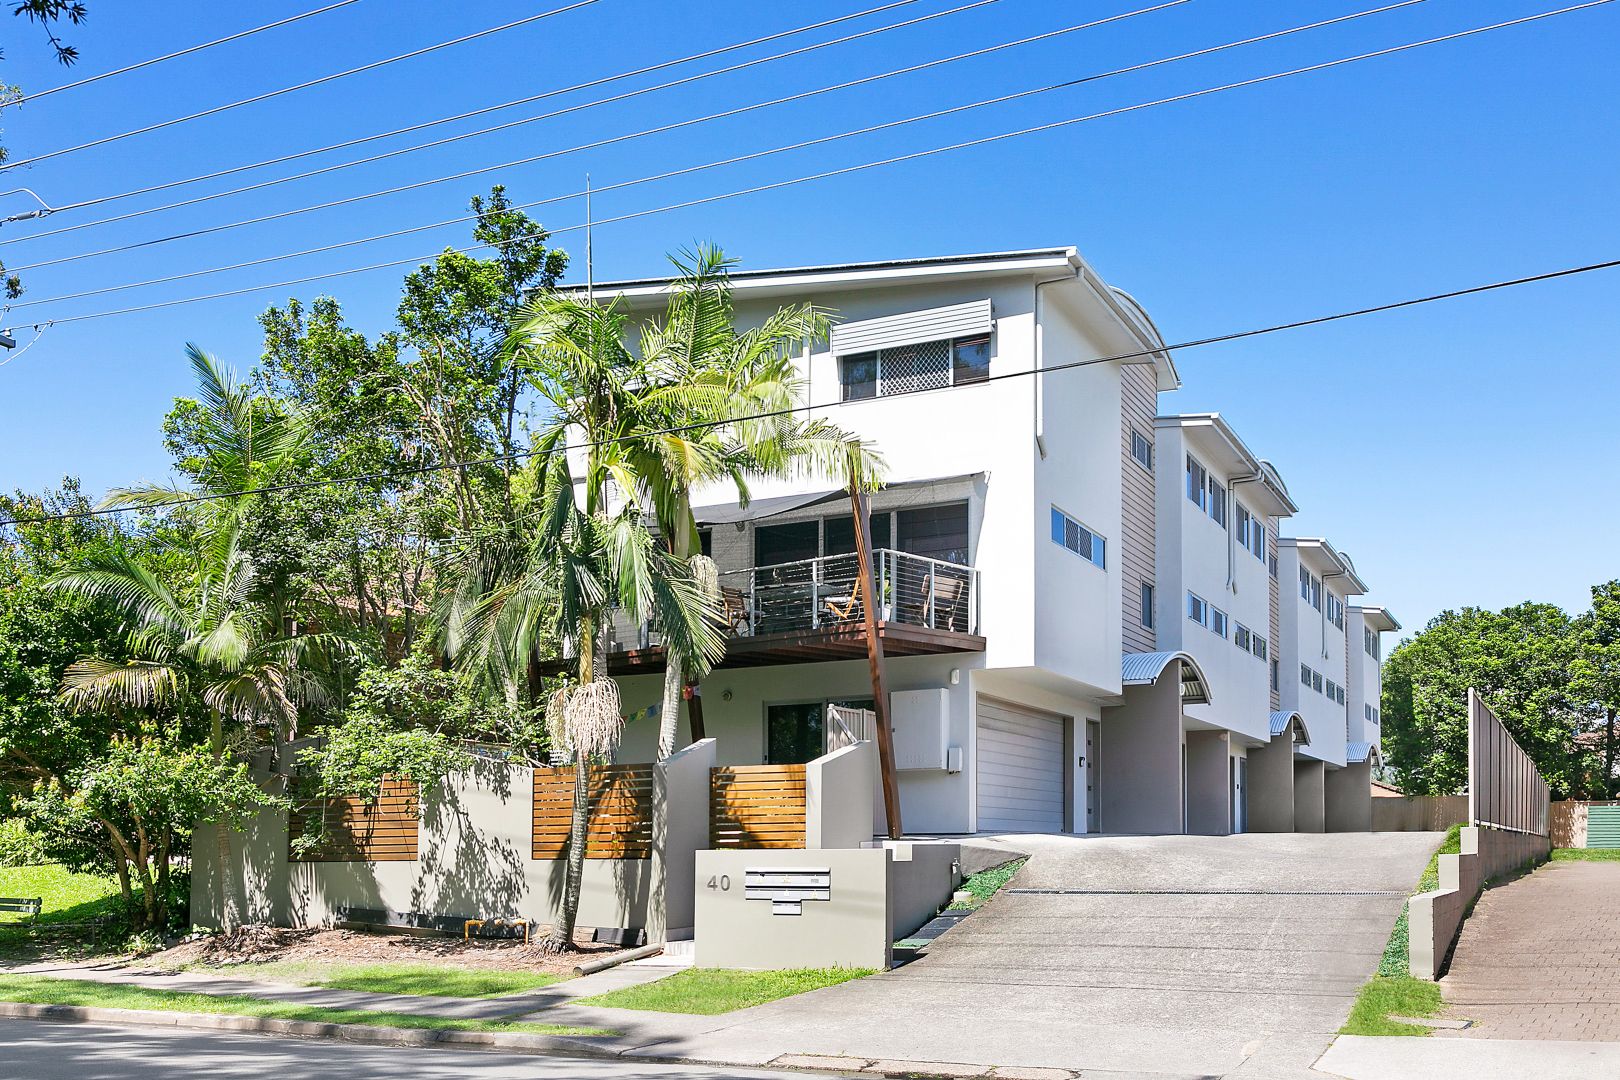 5/40 Dry Dock Road, Tweed Heads South NSW 2486